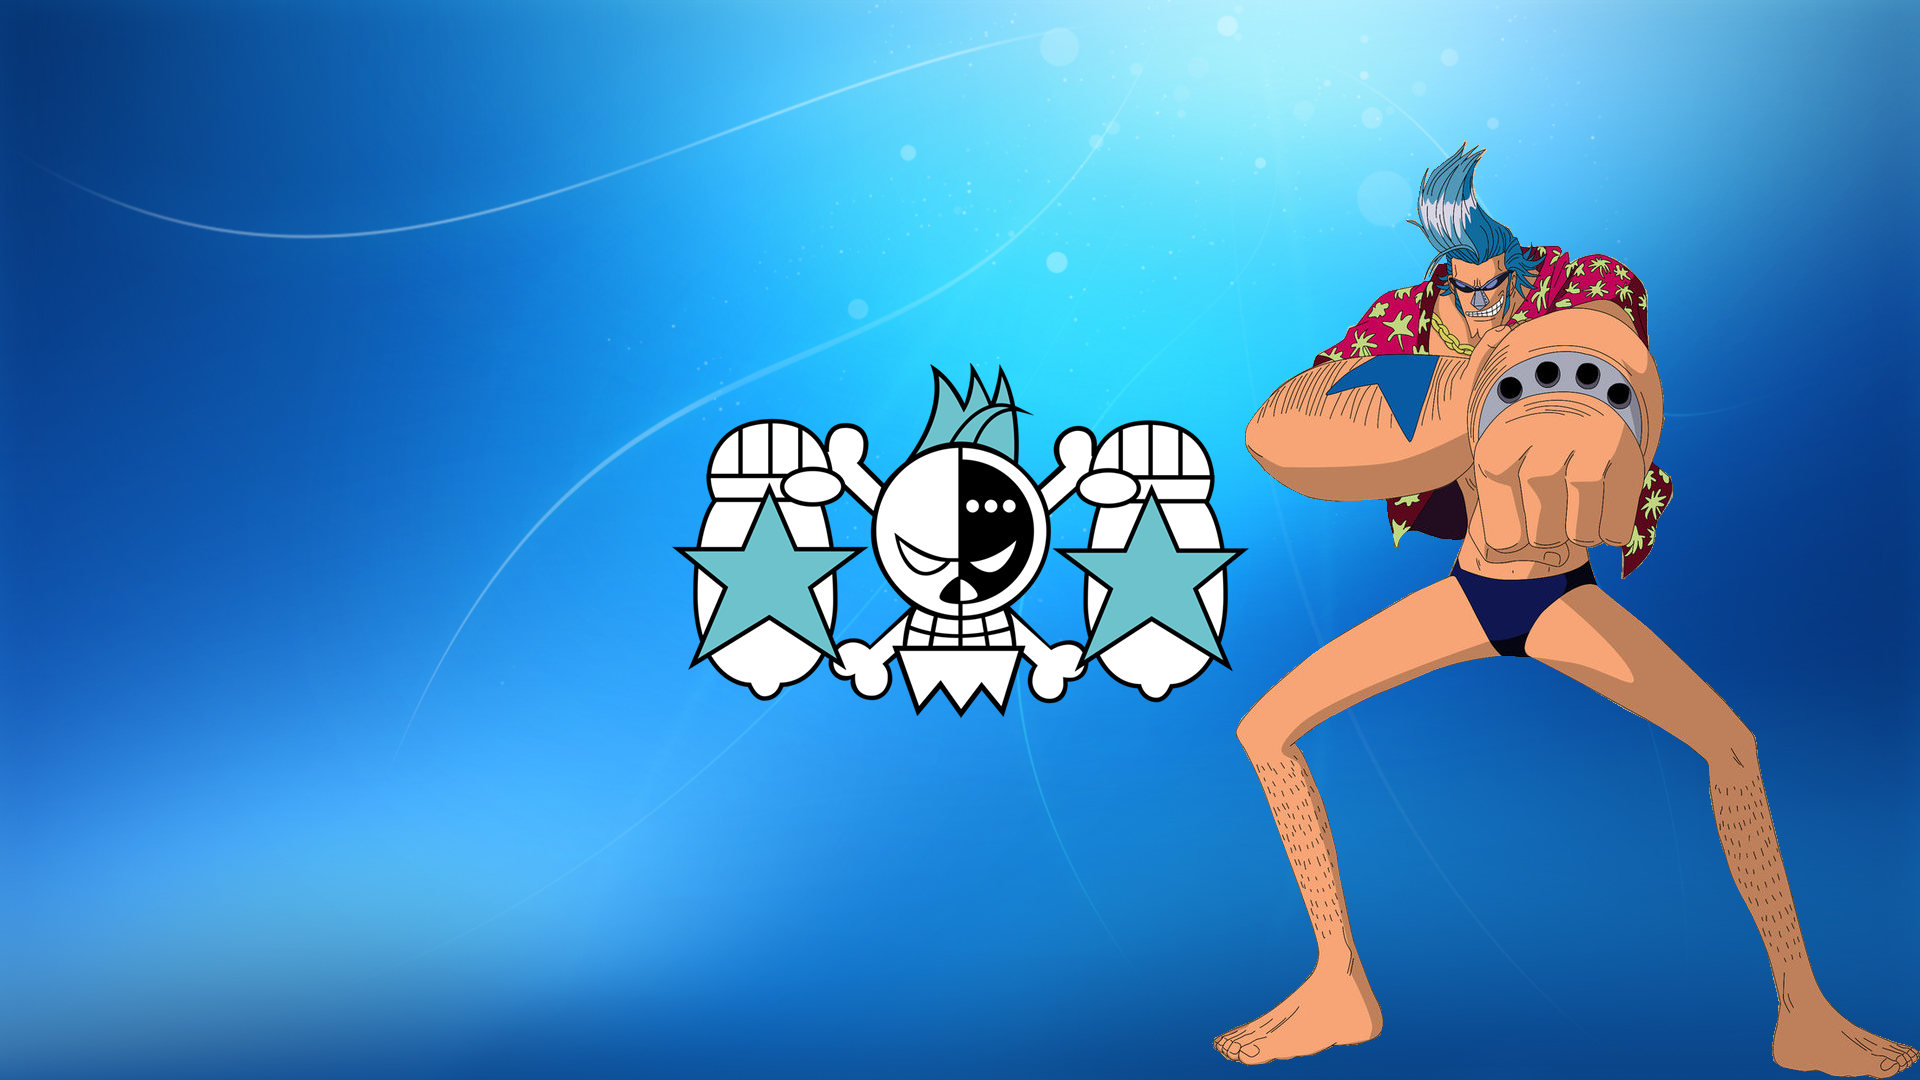 One Piece Blue Wallpapers